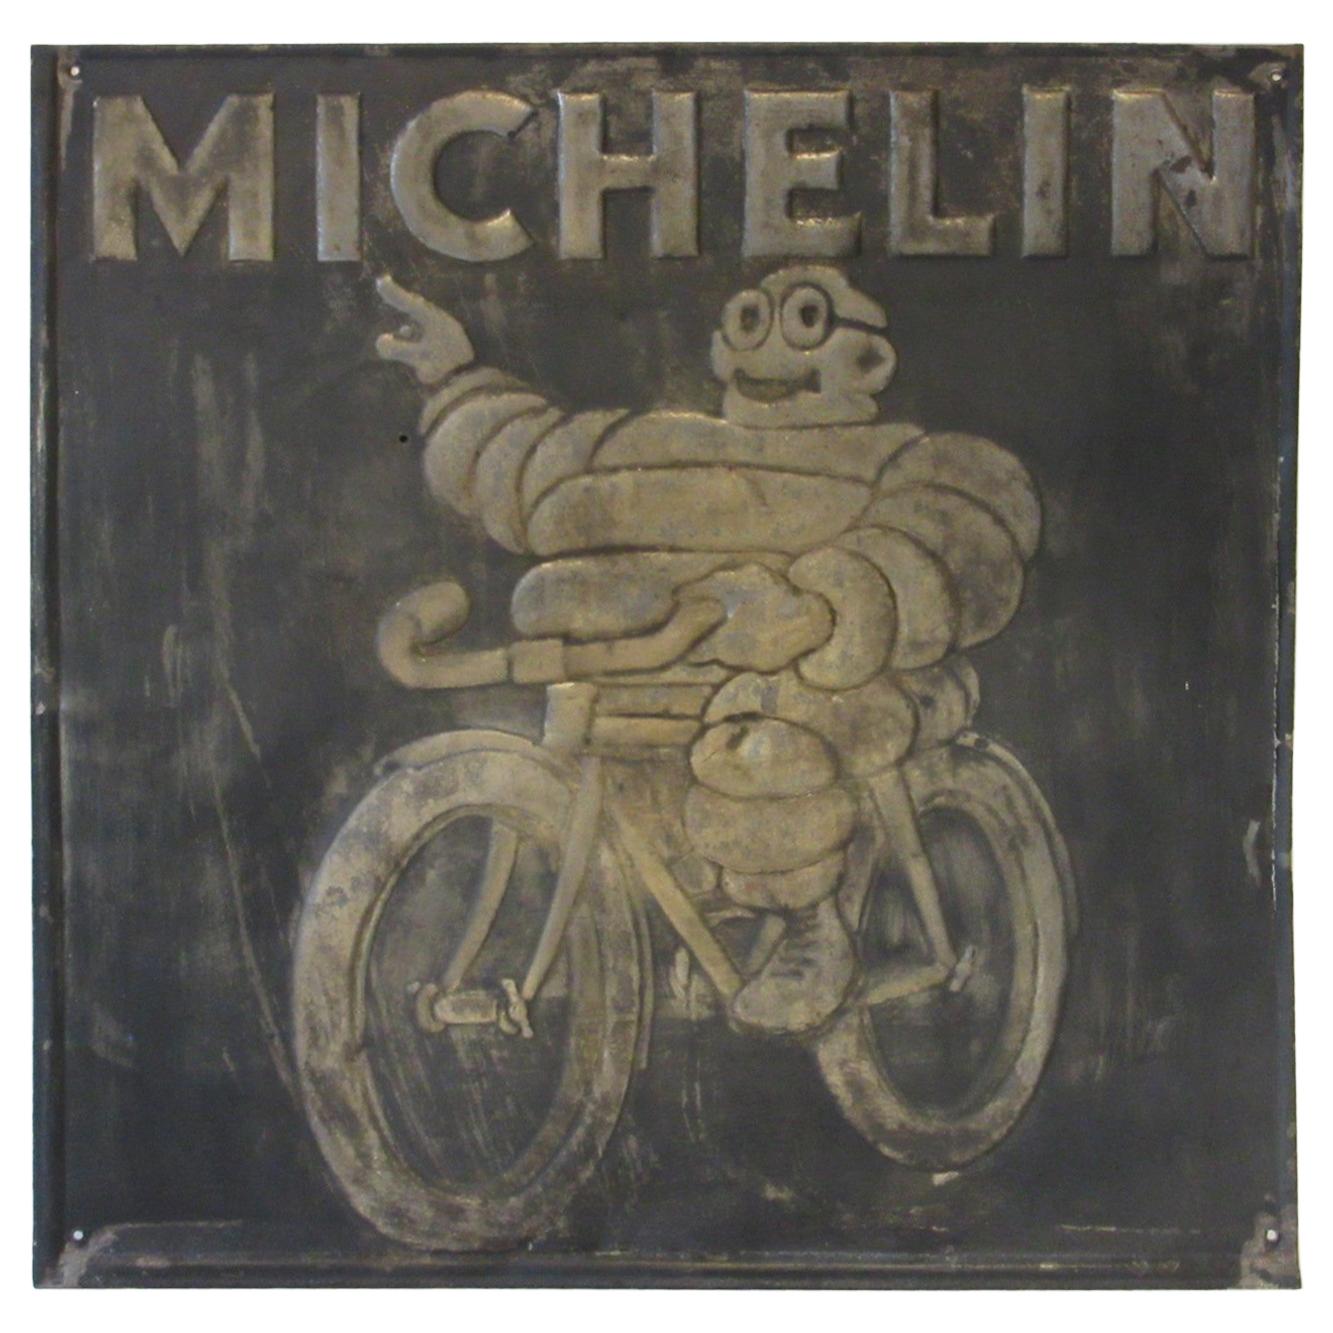 Vintage Michelin Tire Metal Sign